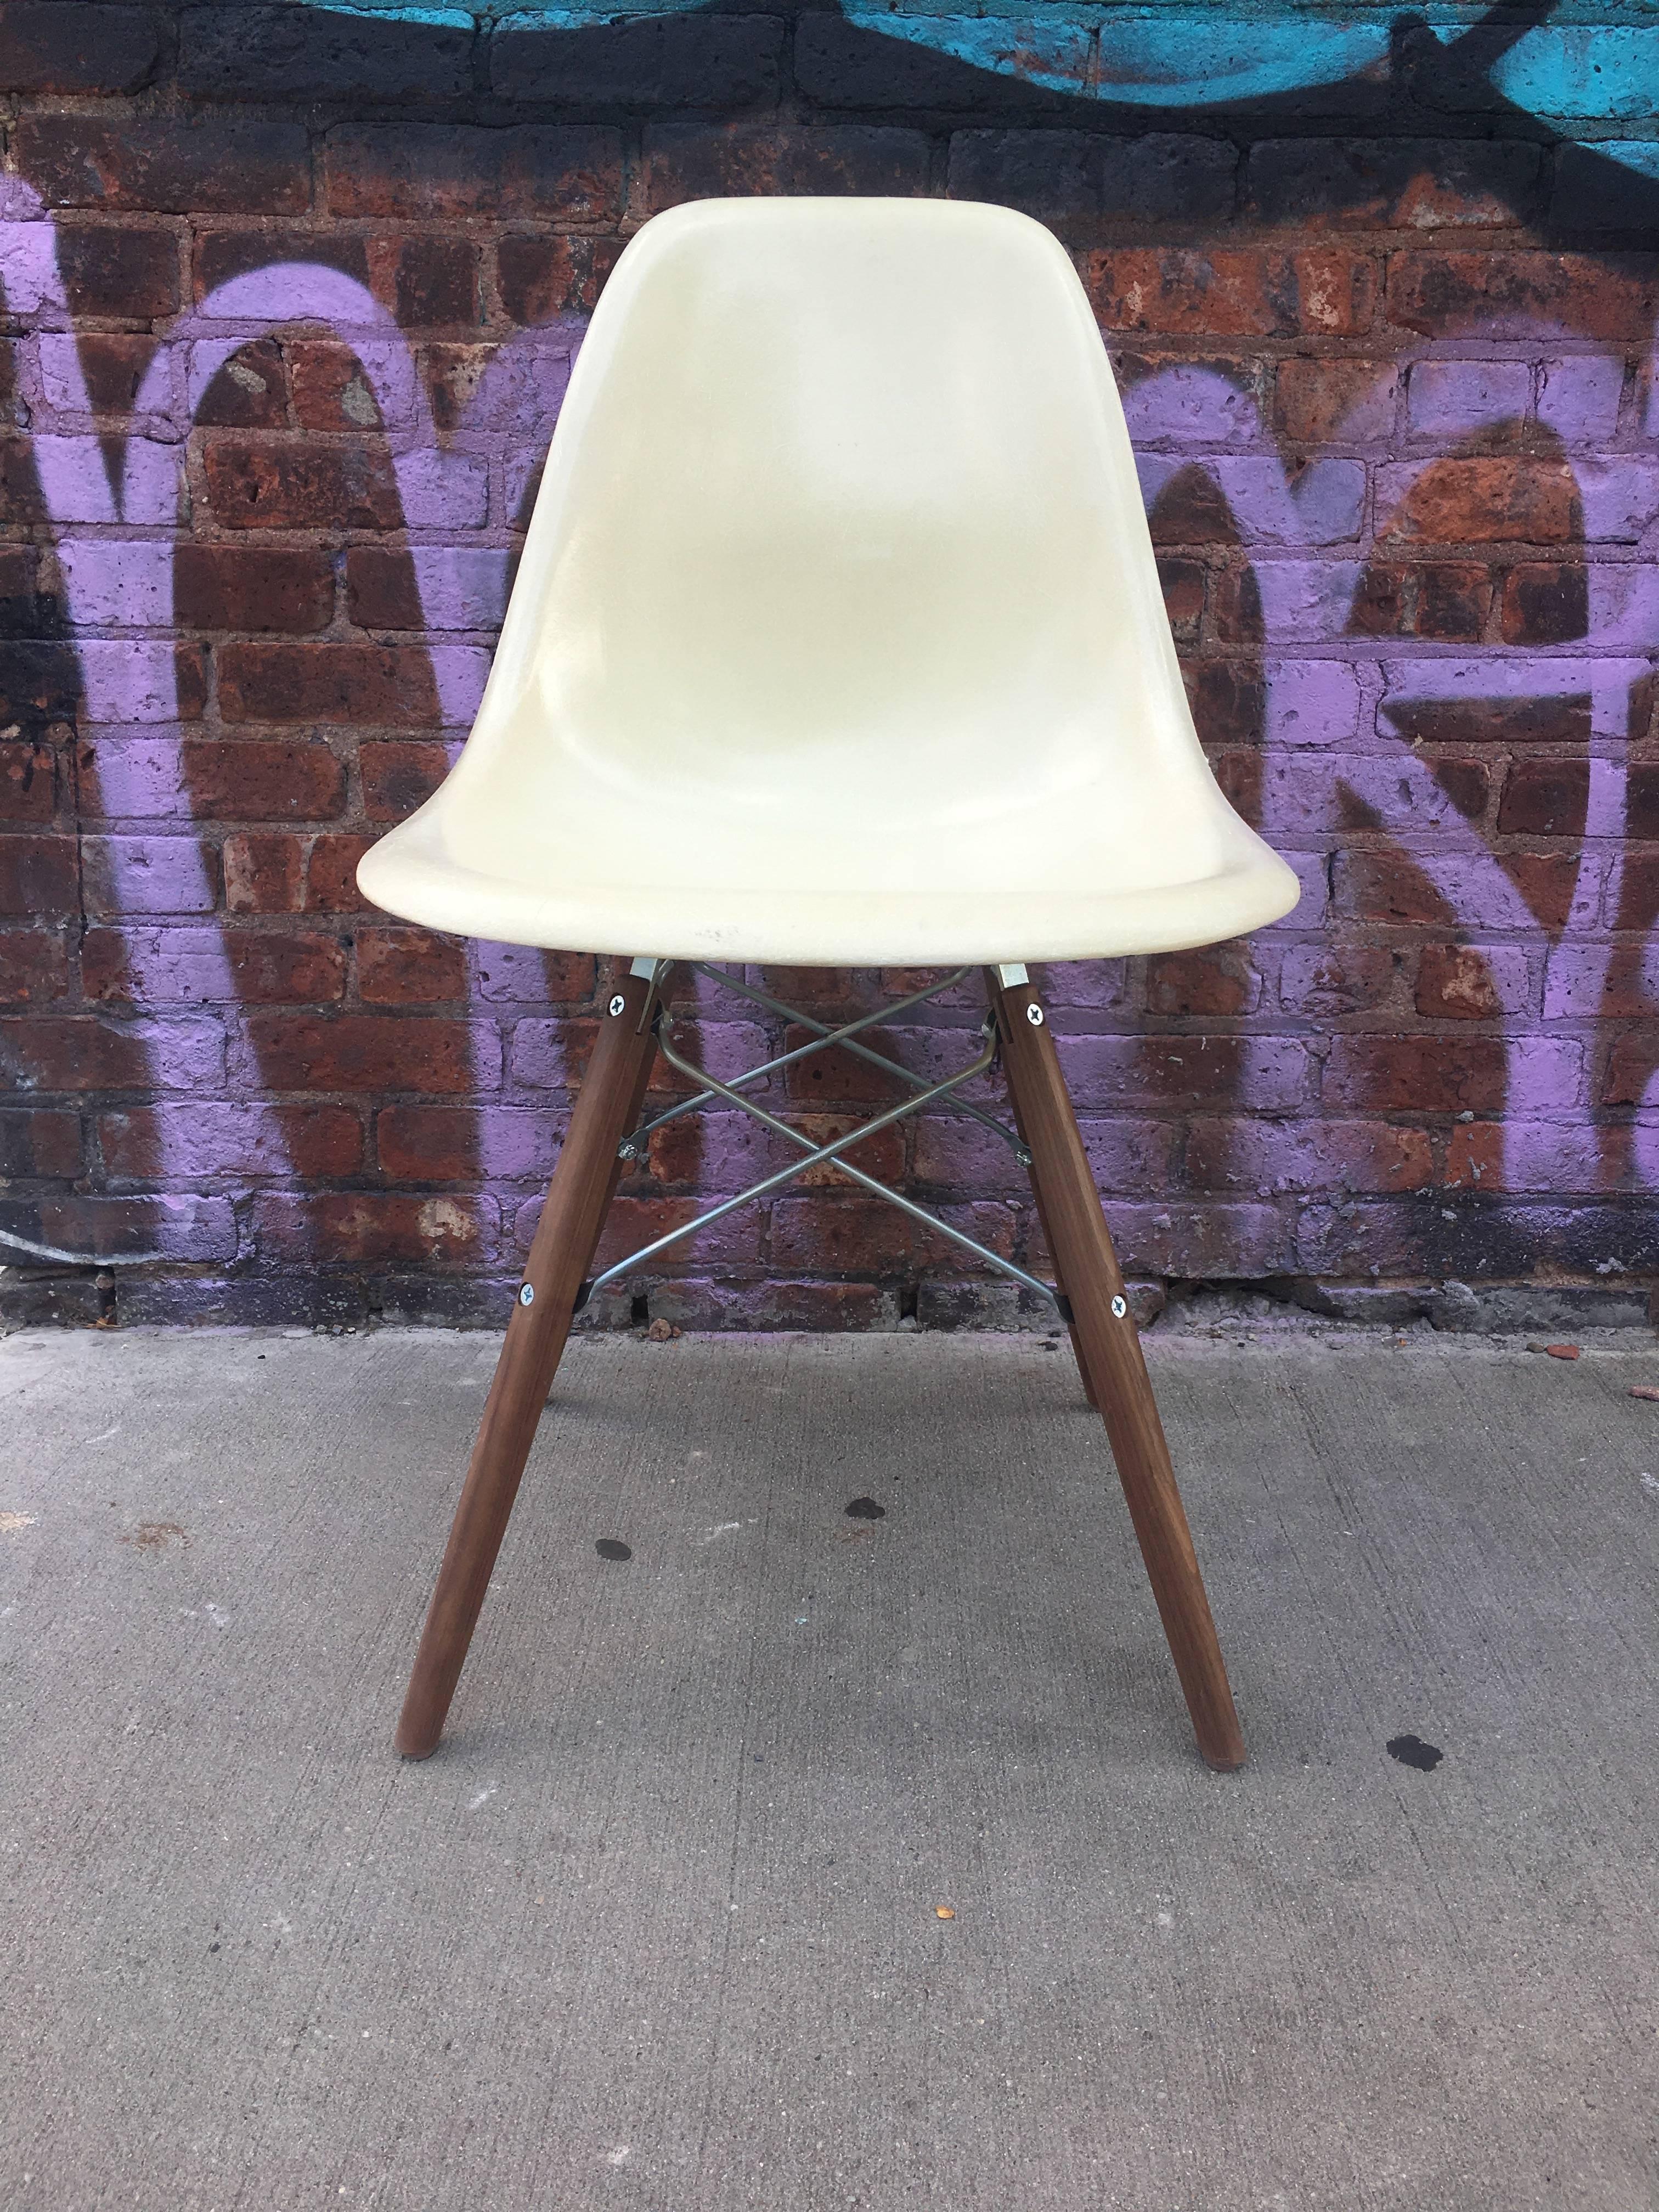 10 Herman Miller Eames multicolored dining chairs. Ships disassembled. Shells in good vintage condition with no holes or cracks. All signed Herman Miller. Shells may vary in color due to the volume. Photo of actual base in last photo. Stained walnut